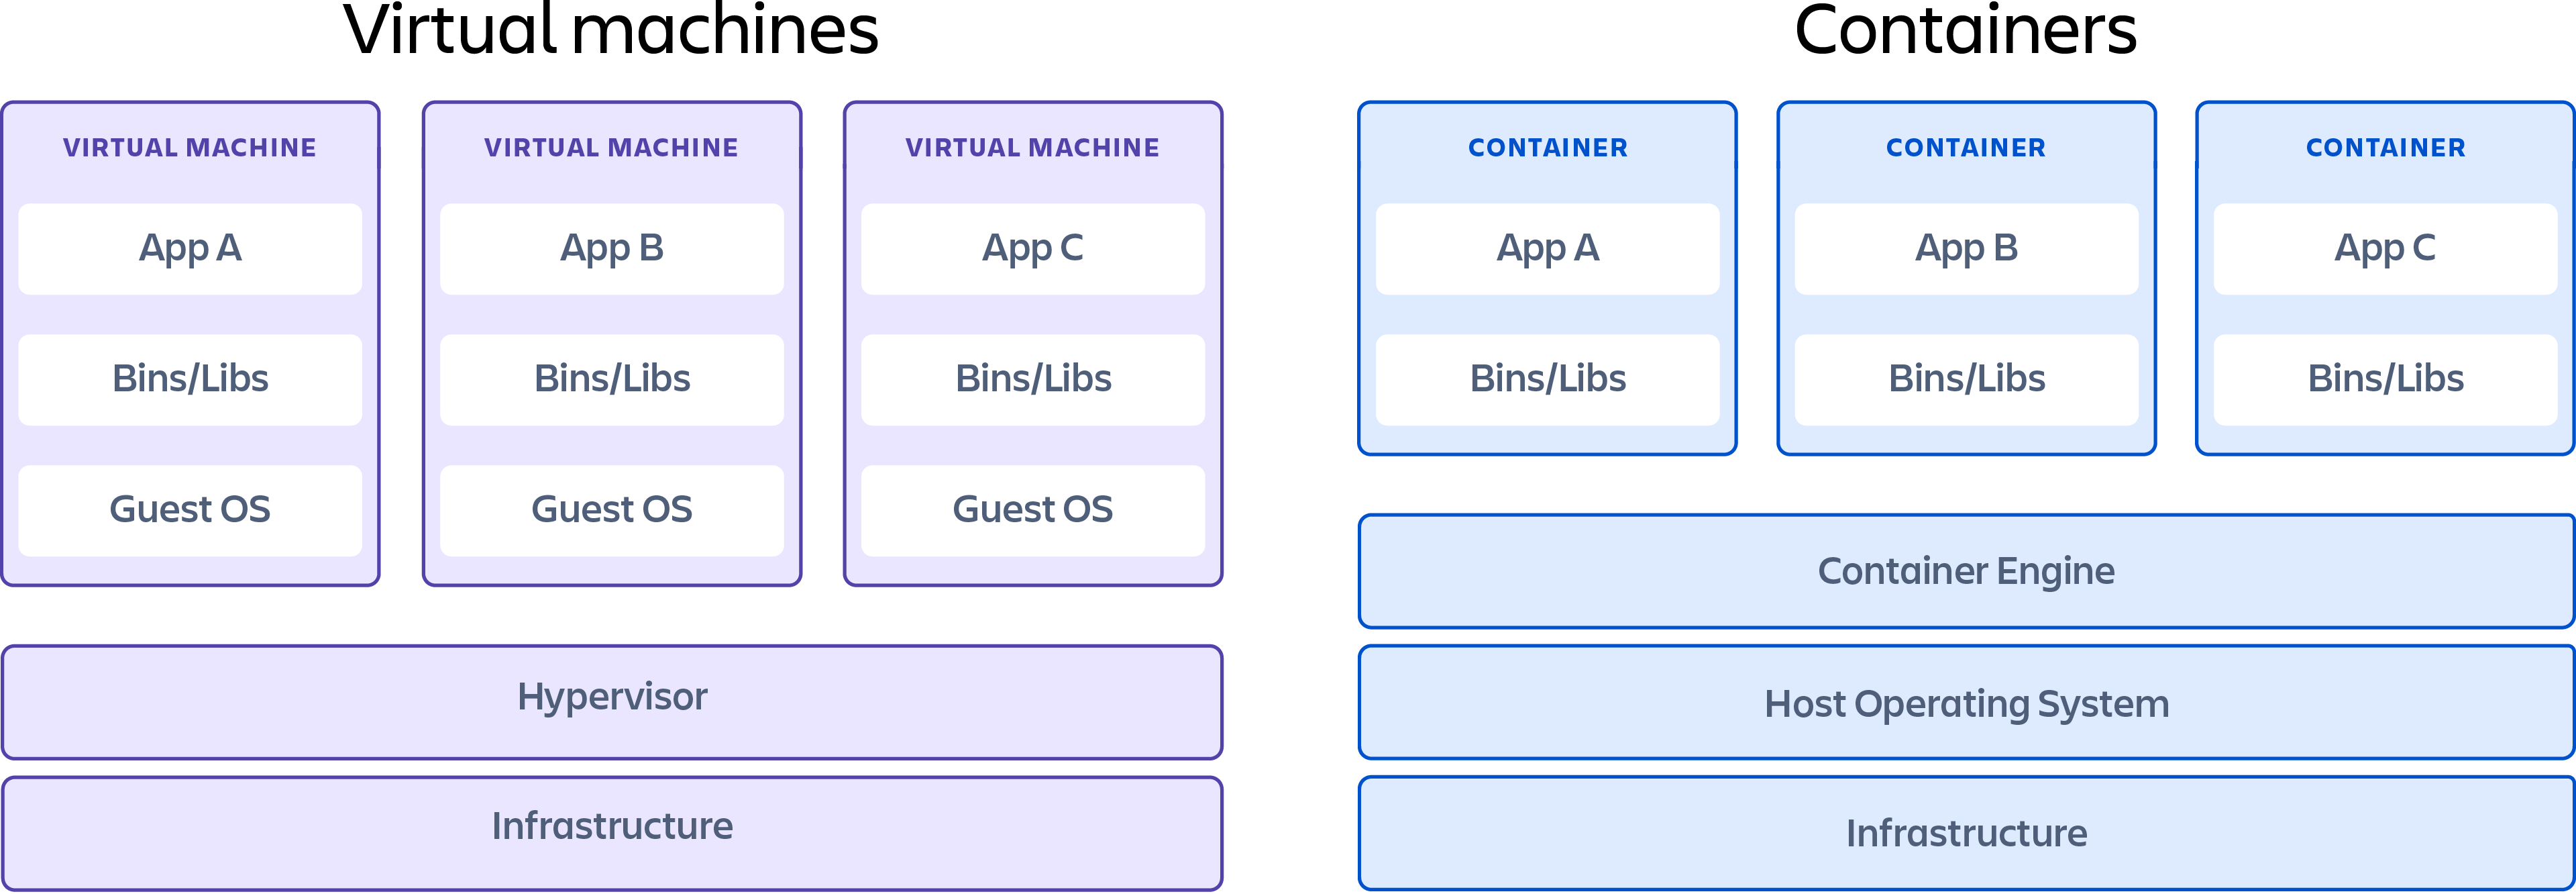 SWTM-2060_Diagram_Containers_VirtualMachines_v03.png